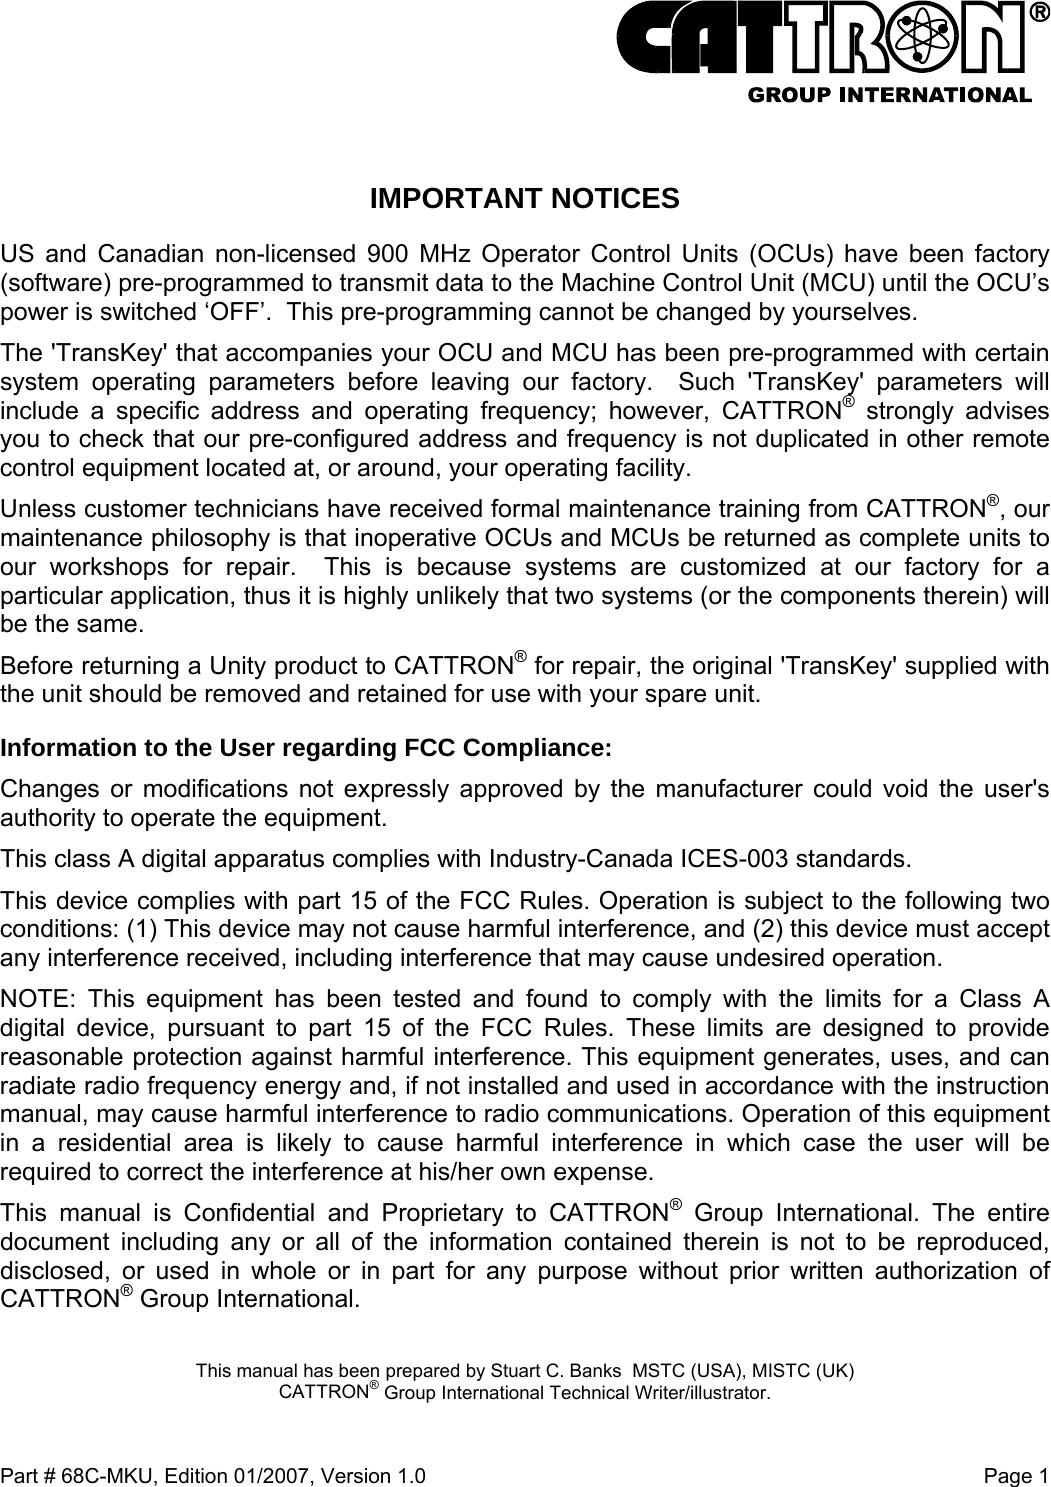  Part # 68C-MKU, Edition 01/2007, Version 1.0  Page 1    IMPORTANT NOTICES US and Canadian non-licensed 900 MHz Operator Control Units (OCUs) have been factory (software) pre-programmed to transmit data to the Machine Control Unit (MCU) until the OCU’s power is switched ‘OFF’.  This pre-programming cannot be changed by yourselves.   The &apos;TransKey&apos; that accompanies your OCU and MCU has been pre-programmed with certain system operating parameters before leaving our factory.  Such &apos;TransKey&apos; parameters will include a specific address and operating frequency; however, CATTRON® strongly advises you to check that our pre-configured address and frequency is not duplicated in other remote control equipment located at, or around, your operating facility. Unless customer technicians have received formal maintenance training from CATTRON®, our maintenance philosophy is that inoperative OCUs and MCUs be returned as complete units to our workshops for repair.  This is because systems are customized at our factory for a particular application, thus it is highly unlikely that two systems (or the components therein) will be the same.     Before returning a Unity product to CATTRON® for repair, the original &apos;TransKey&apos; supplied with the unit should be removed and retained for use with your spare unit. Information to the User regarding FCC Compliance: Changes or modifications not expressly approved by the manufacturer could void the user&apos;s authority to operate the equipment. This class A digital apparatus complies with Industry-Canada ICES-003 standards. This device complies with part 15 of the FCC Rules. Operation is subject to the following two conditions: (1) This device may not cause harmful interference, and (2) this device must accept any interference received, including interference that may cause undesired operation. NOTE: This equipment has been tested and found to comply with the limits for a Class A digital device, pursuant to part 15 of the FCC Rules. These limits are designed to provide reasonable protection against harmful interference. This equipment generates, uses, and can radiate radio frequency energy and, if not installed and used in accordance with the instruction manual, may cause harmful interference to radio communications. Operation of this equipment in a residential area is likely to cause harmful interference in which case the user will be required to correct the interference at his/her own expense. This manual is Confidential and Proprietary to CATTRON® Group International. The entire document including any or all of the information contained therein is not to be reproduced, disclosed, or used in whole or in part for any purpose without prior written authorization of CATTRON® Group International.  This manual has been prepared by Stuart C. Banks  MSTC (USA), MISTC (UK) CATTRON® Group International Technical Writer/illustrator.  